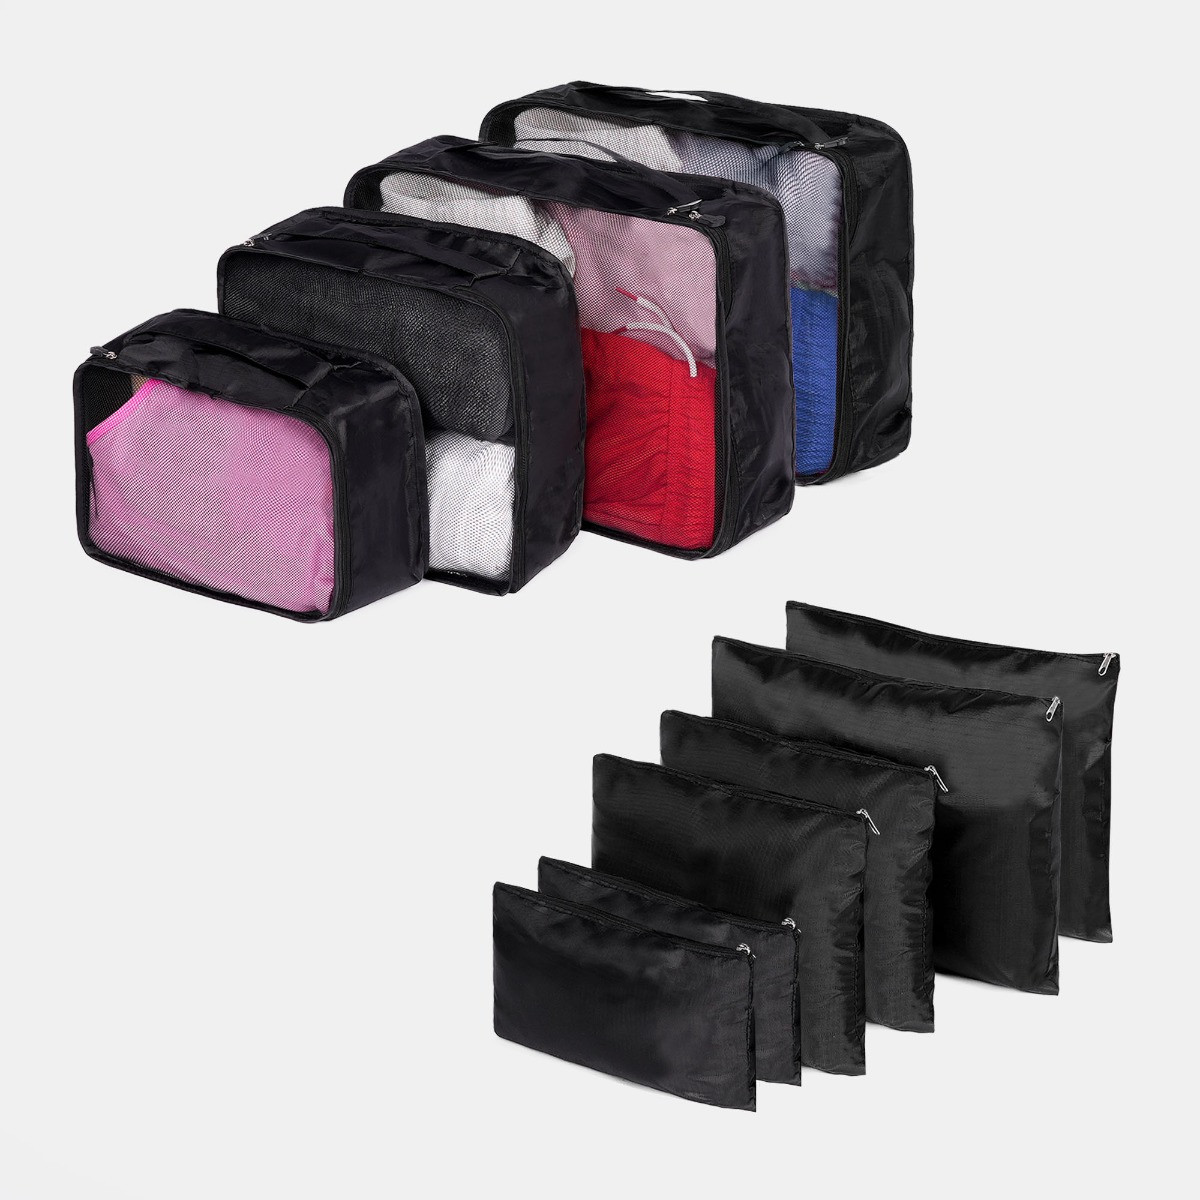 OHS Travel Packing Cube And Bags Set, Black - 10 Piece>